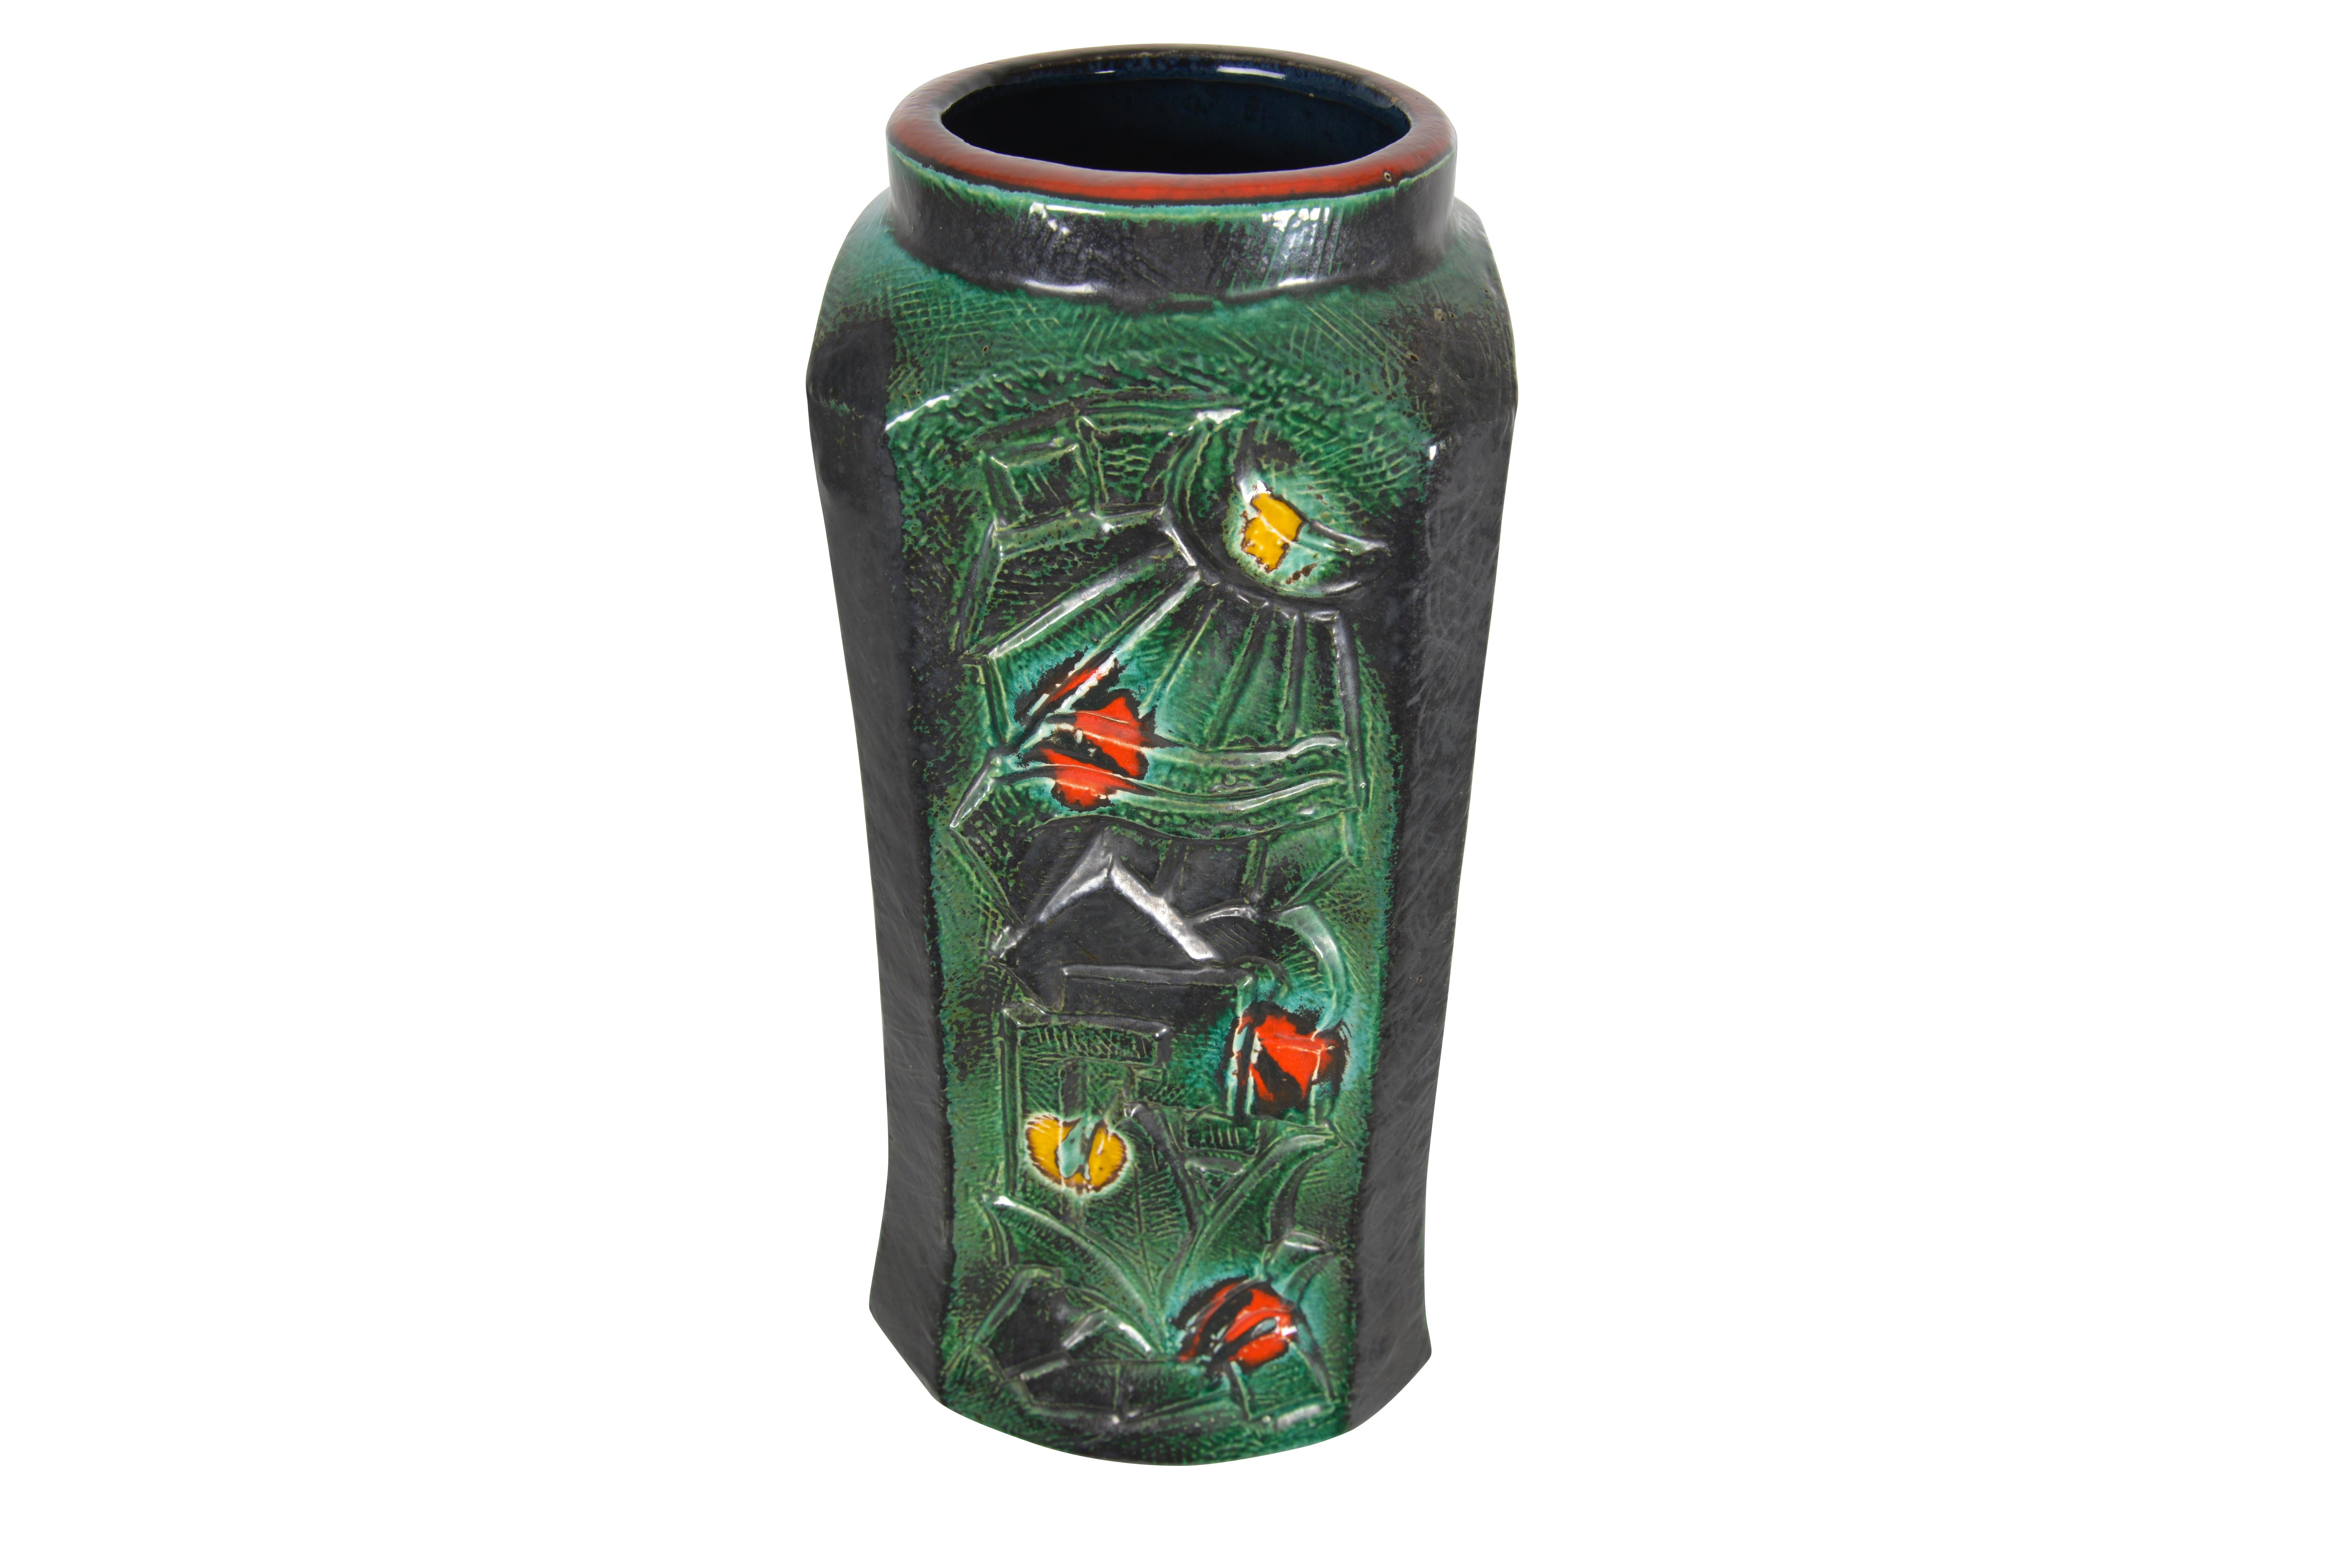 Delicately green patinated vase with on three sides Art Deco stylized patterns and on the main side a deco palmtree and sunburst. Scattered yellow and red accent dots. Marked 234/46.